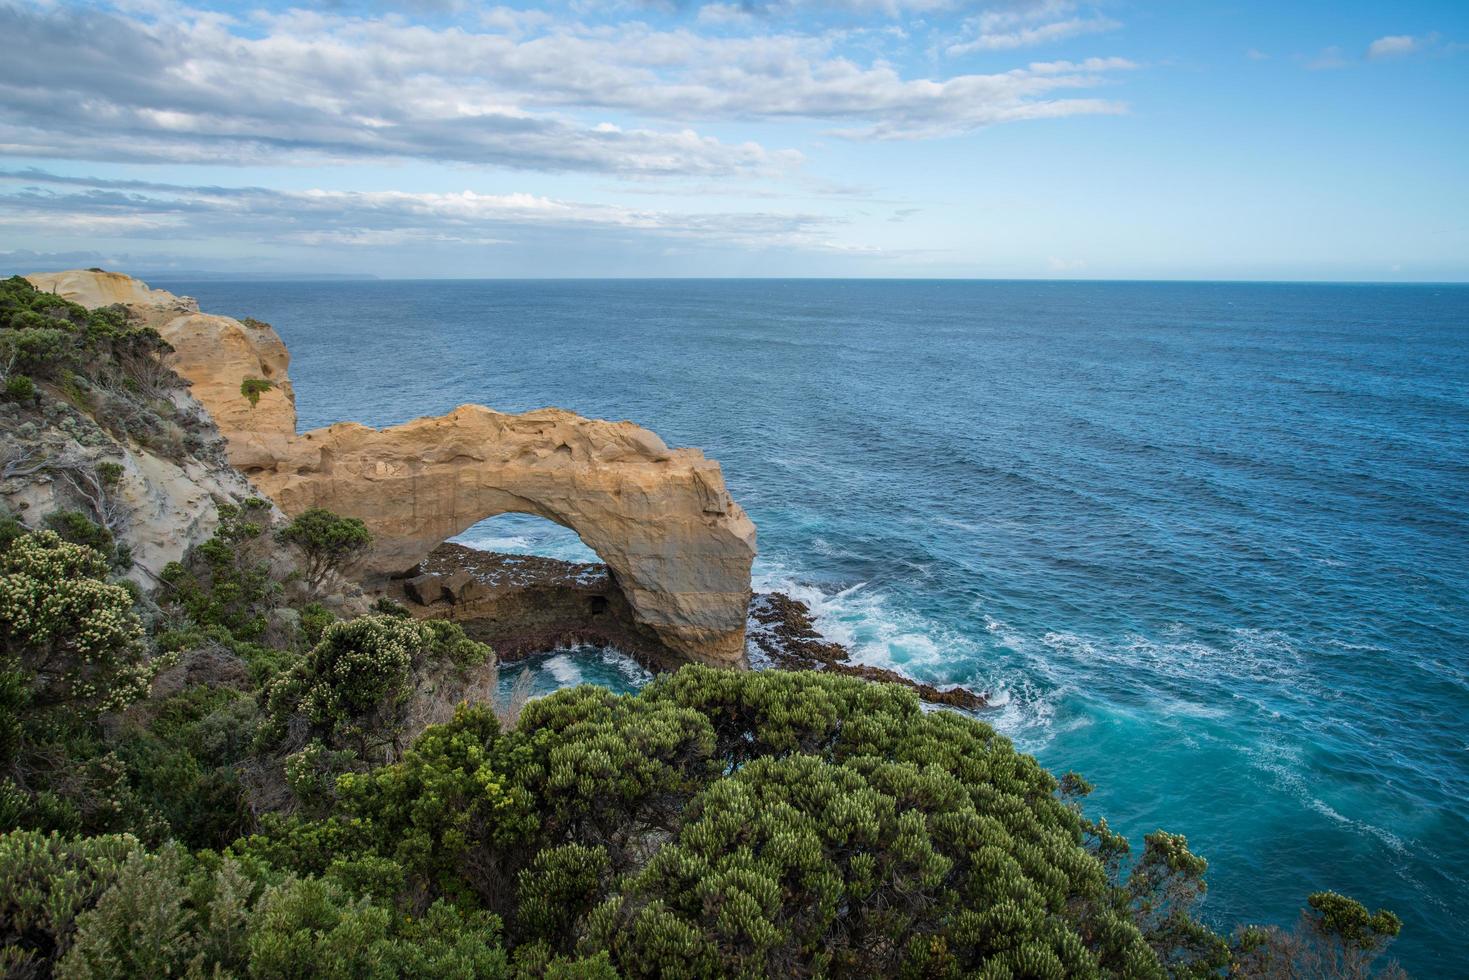 The Grotto an iconic arch rock formation in The Great Ocean Road of Australia. photo